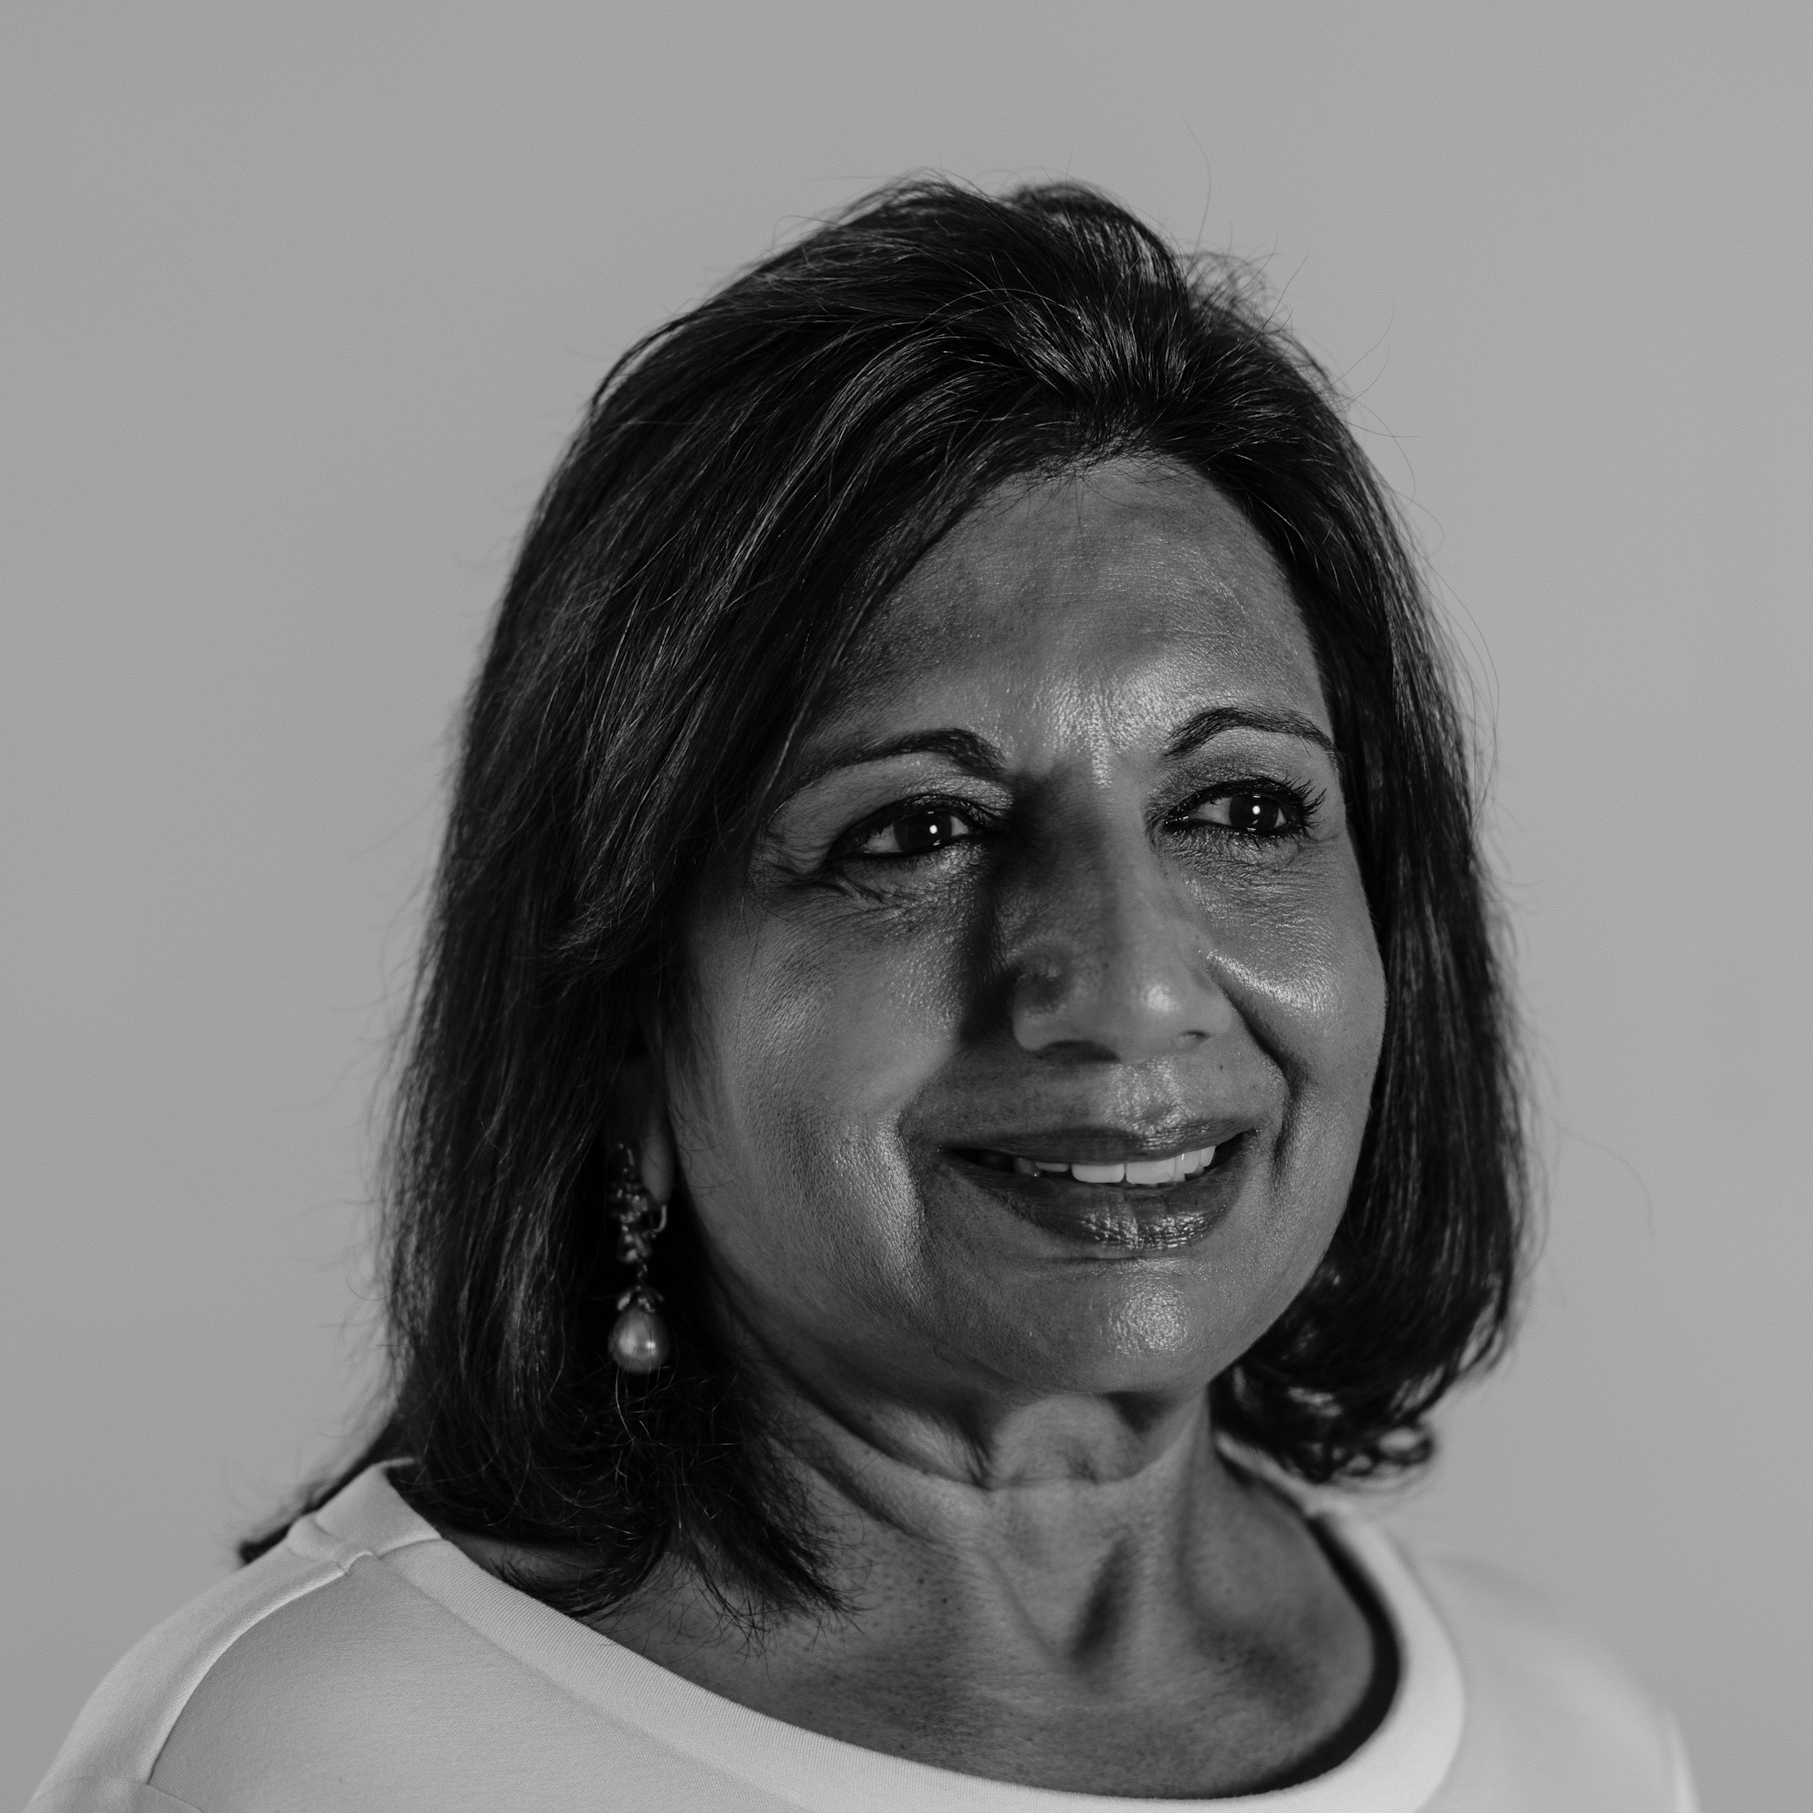 Kiran Mazumdar Shaw in black and white smiling away from the camera, she has chin length hair and is wearing a white round neck shirt and drop earrings.